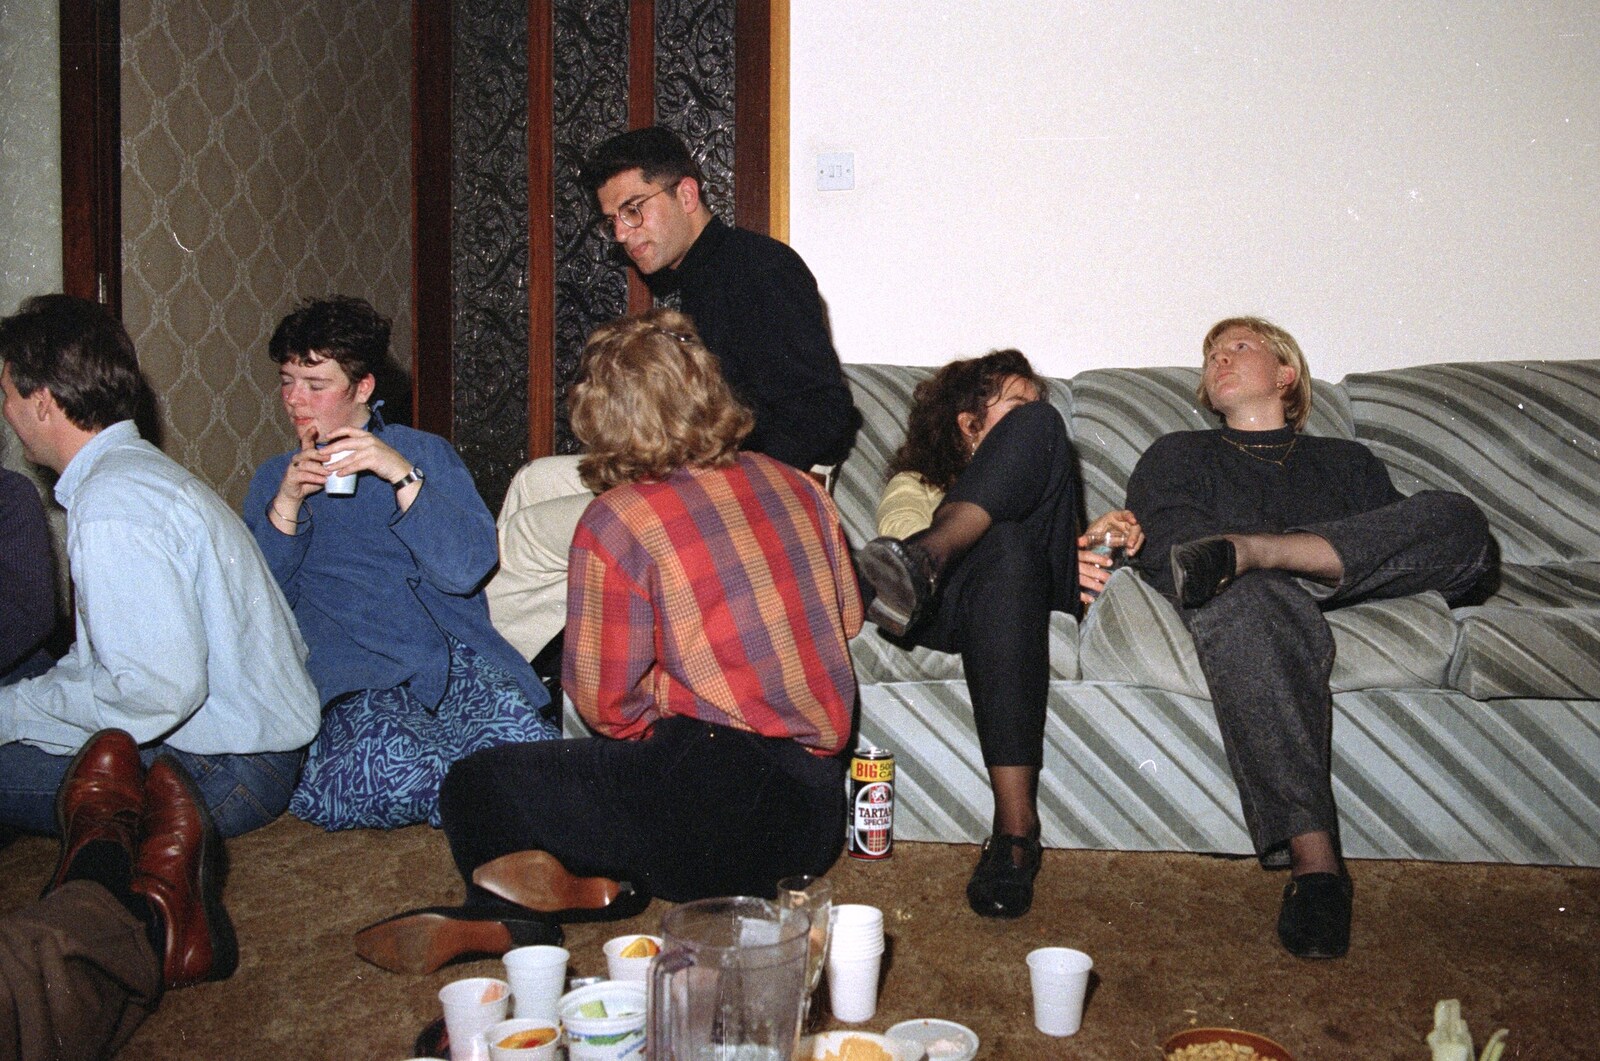 Hamish's Oxford Party, Oxfordshire - 25th April 1992: Party chatter